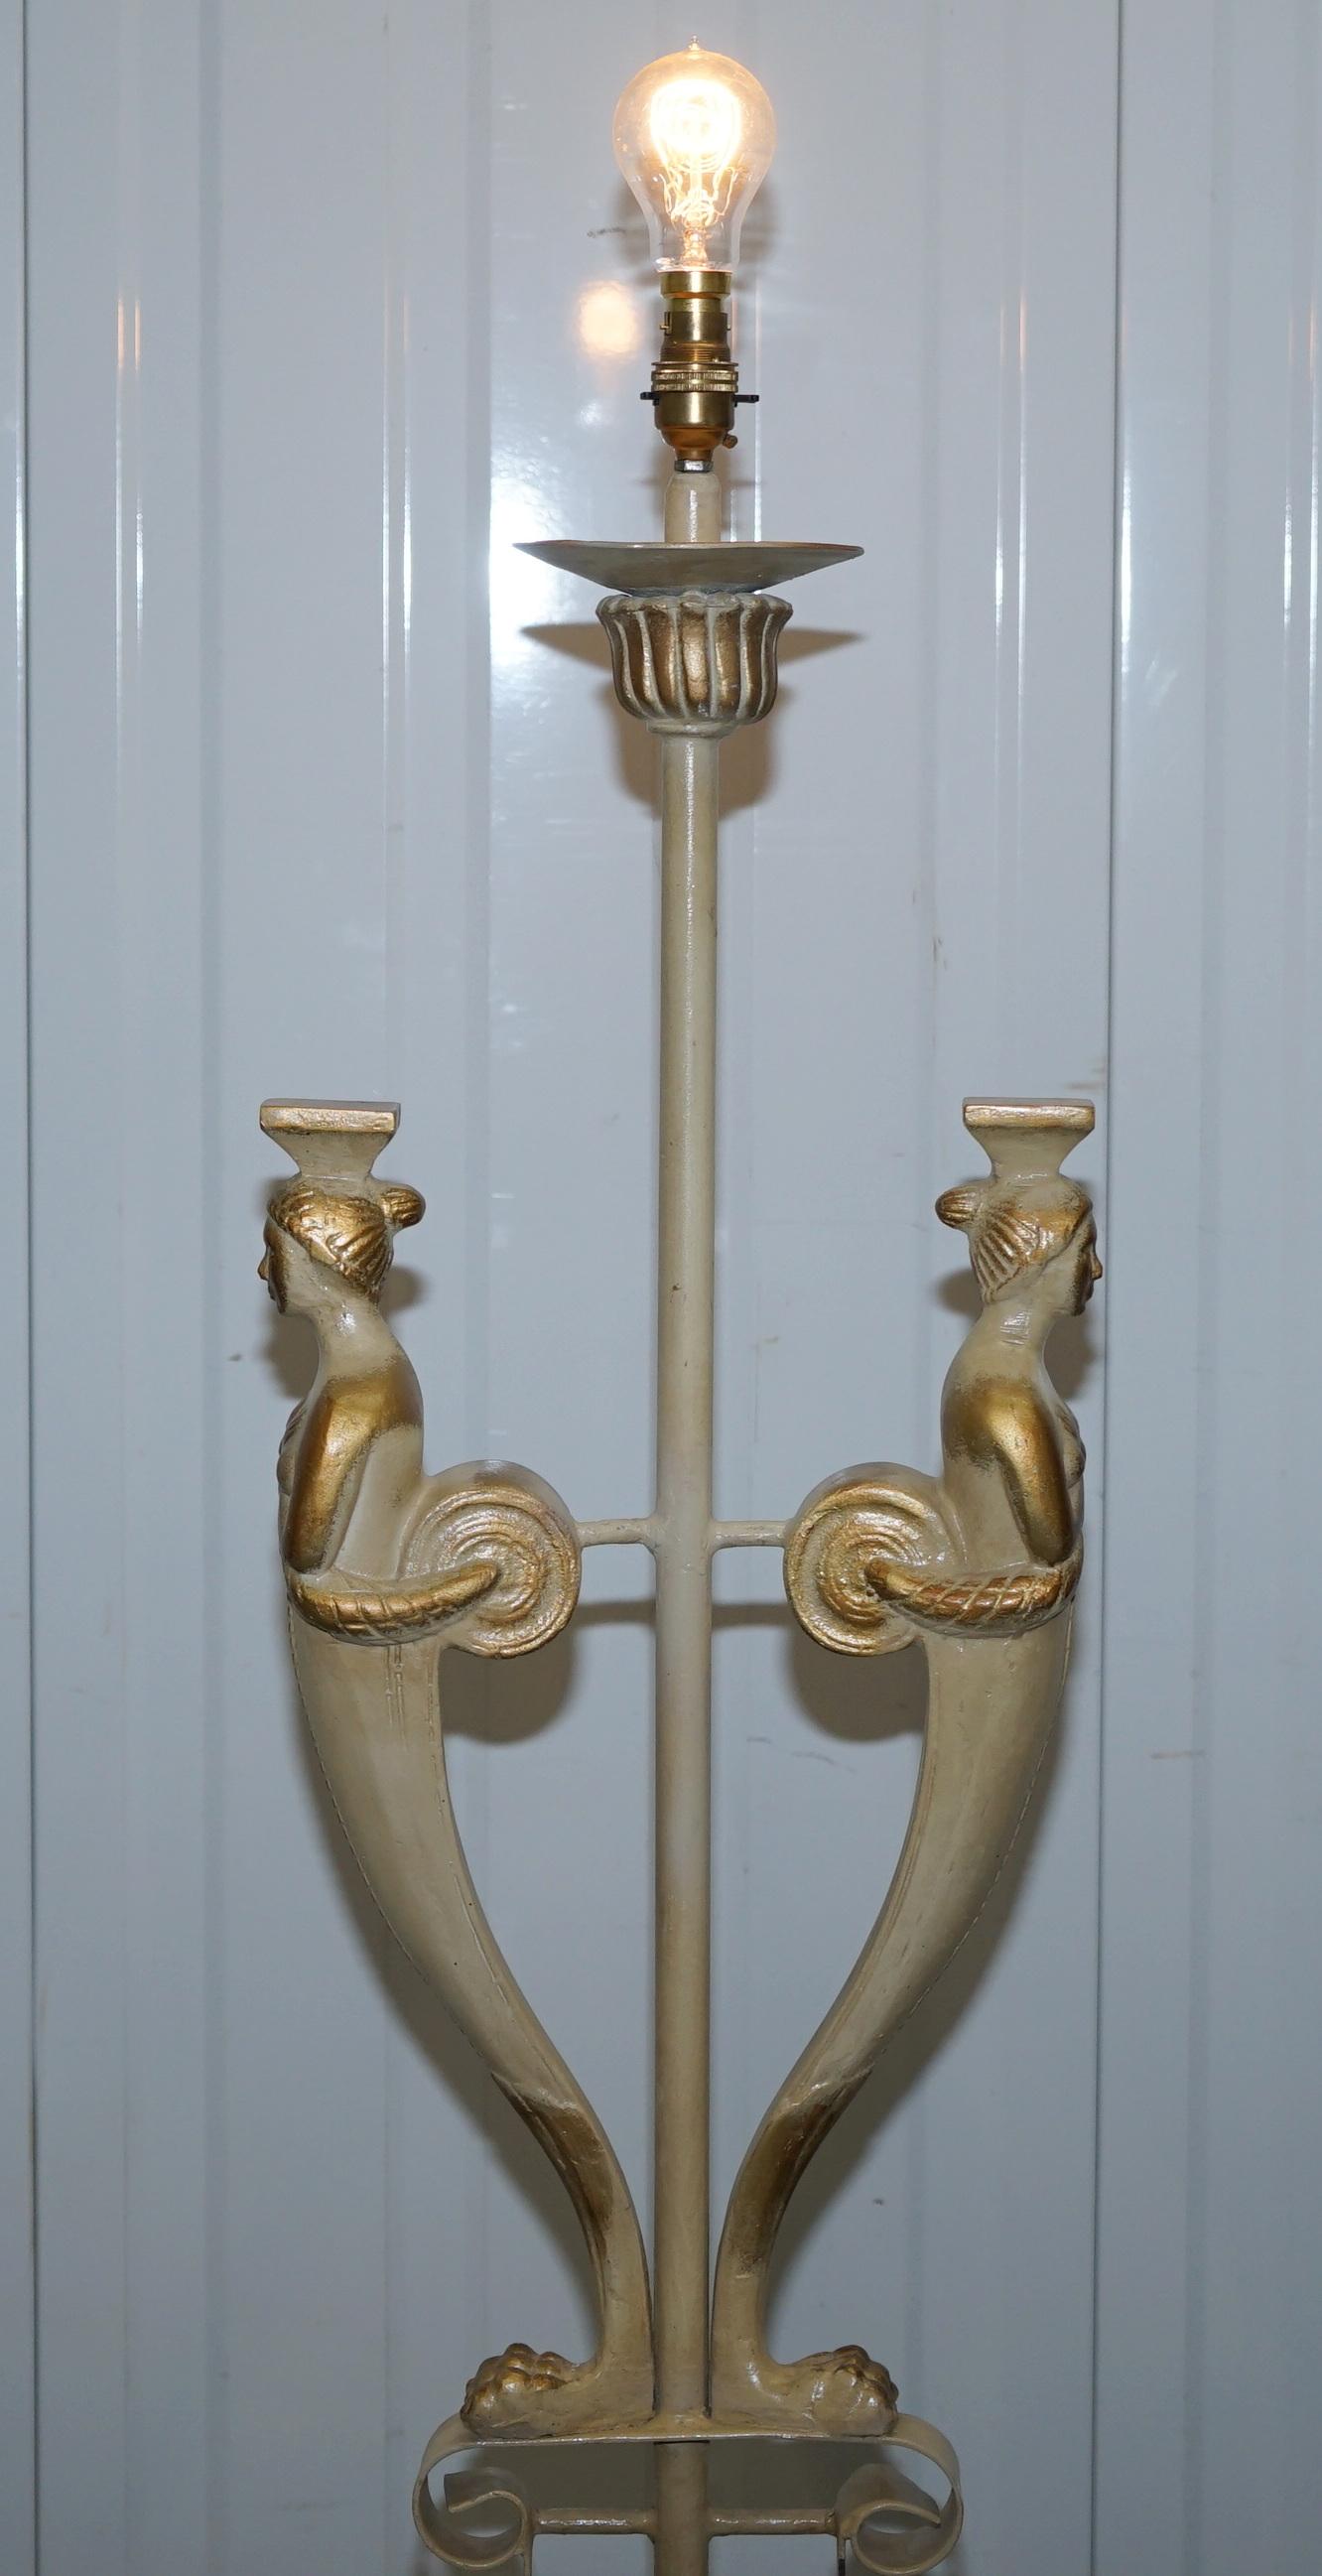 We are delighted to offer for sale this lovely floor standing hand painted metal lamp depicting a ships bust or figurehead and finished with a lion's hairy paw foot

A very good looking and nicely observed piece, its all metal, hand painted, it